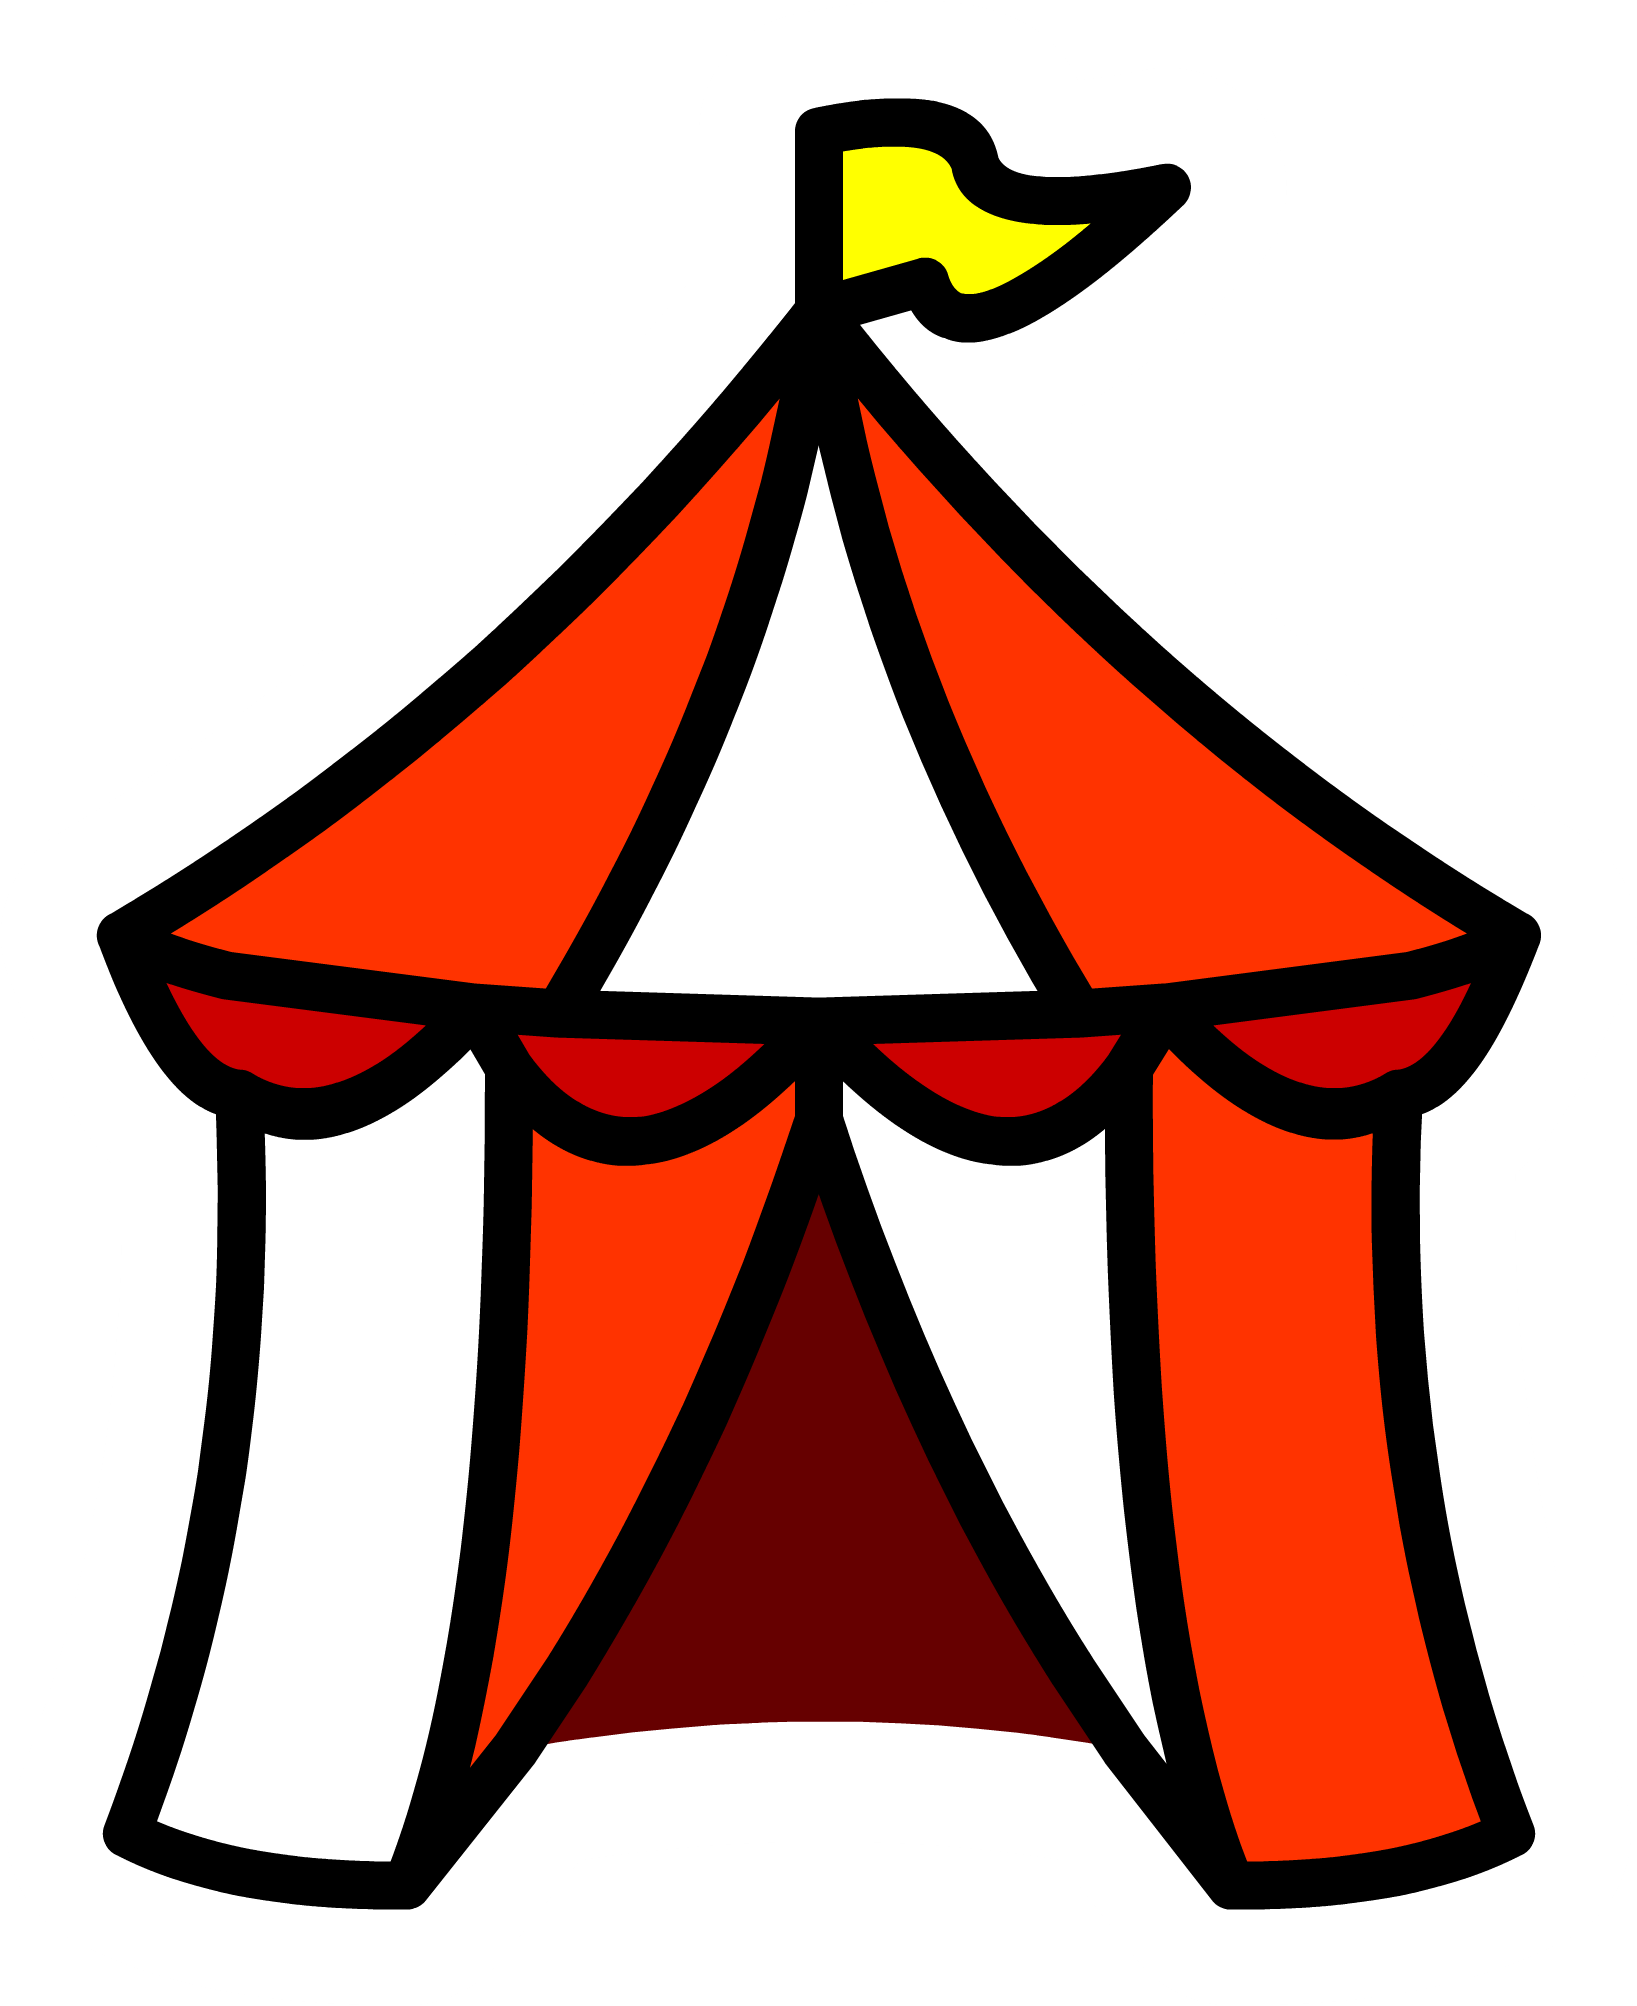 Circus Tent pin | Club Penguin Wiki | Fandom powered by Wikia